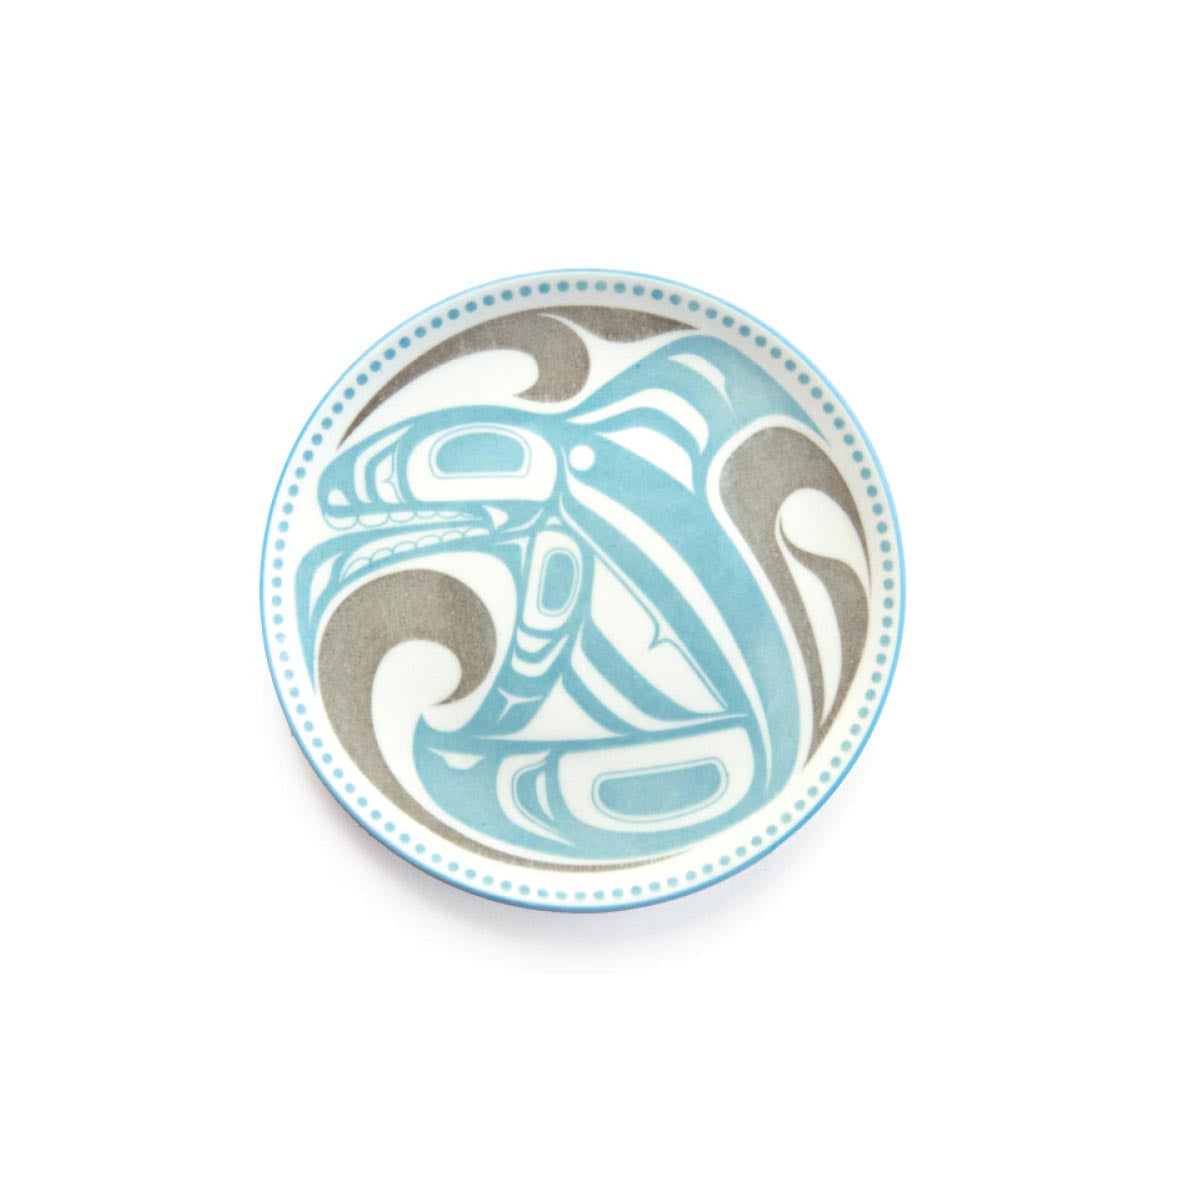 Porcelain Art Plate KW - Porcelain Art Plate KW -  - House of Himwitsa Native Art Gallery and Gifts